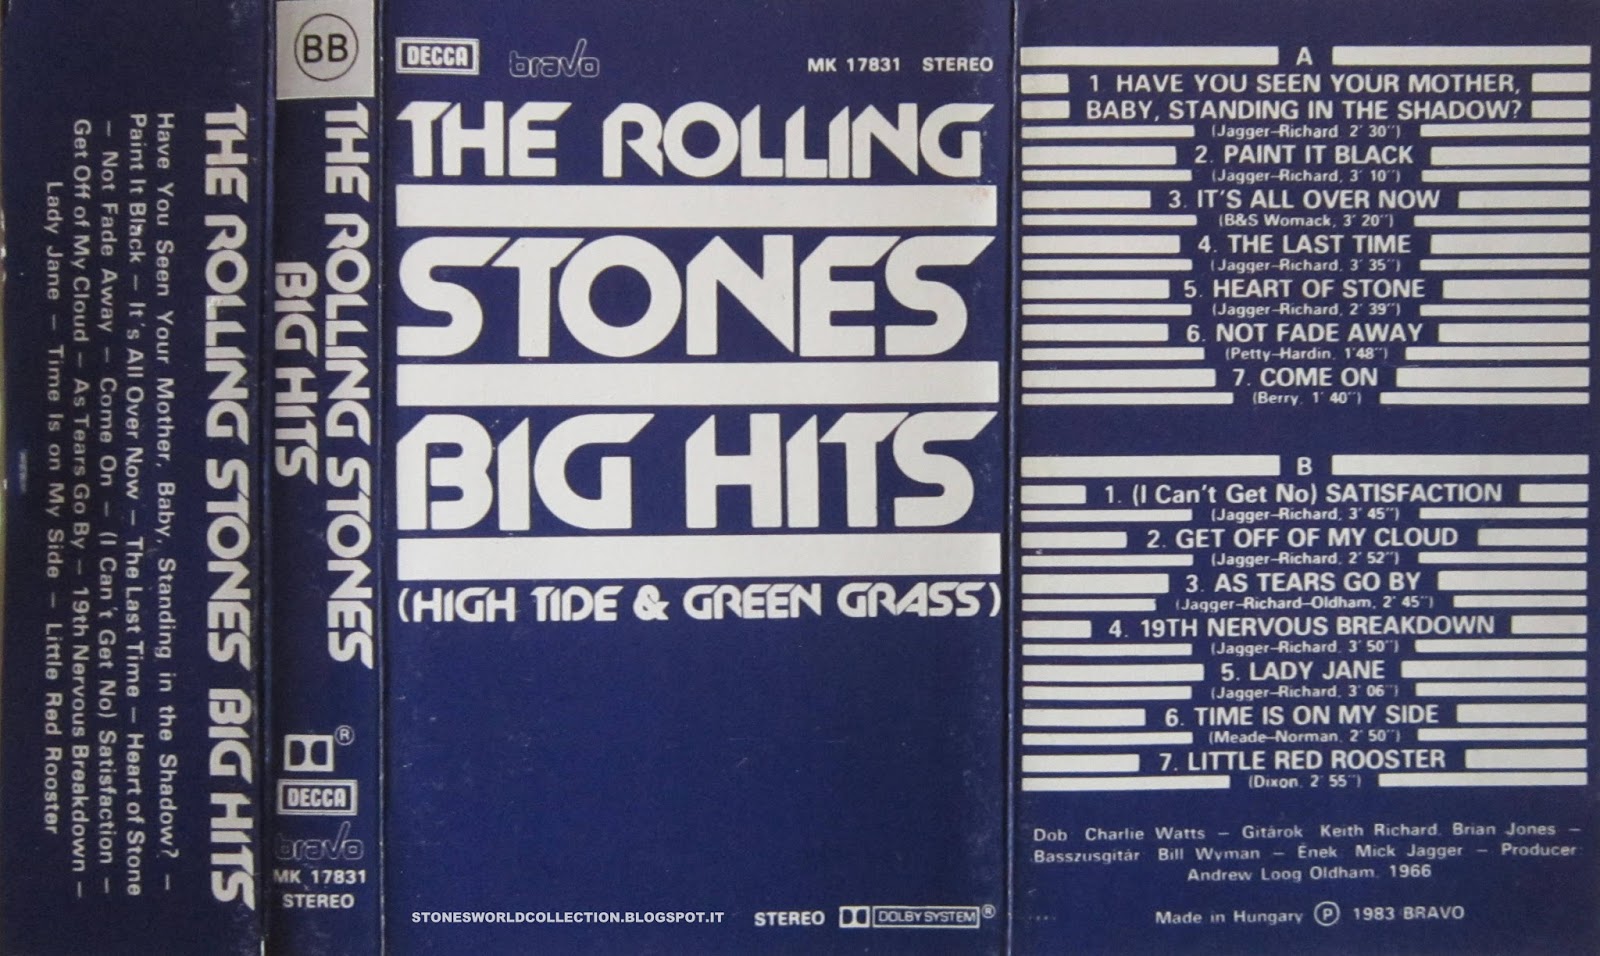 Seen my baby перевод. Rolling Stones big Hits High Tide and Green grass. Big Hits the Rolling Stones. Кассета Rolling Stones 1971. The Rolling Stones – big Hits (High Tide and Green grass) Vinyl.